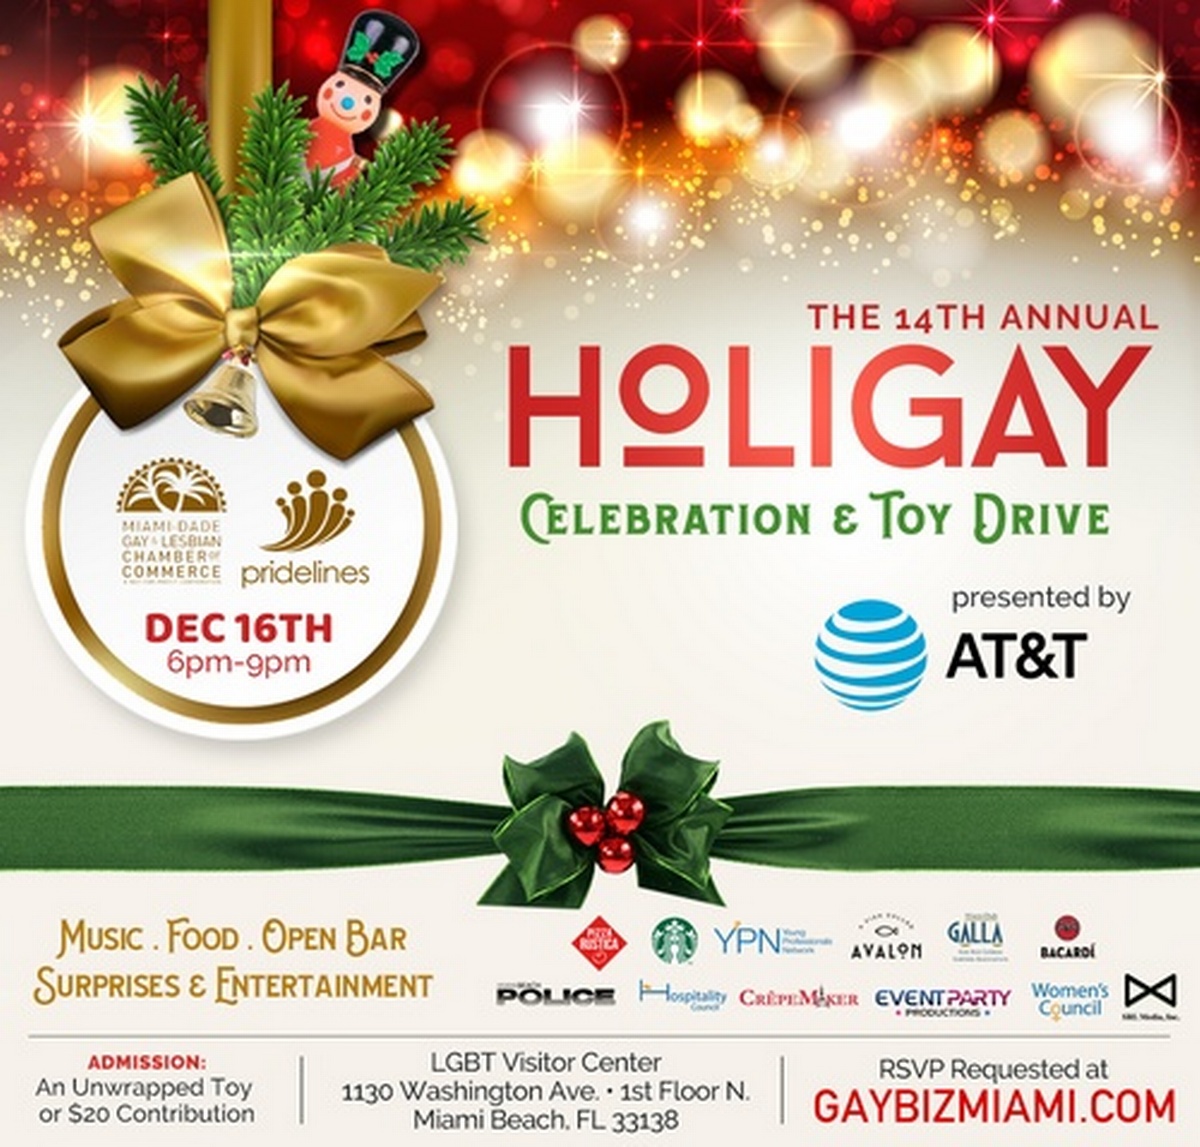 12th Annual HoliGay Celebration and Toy Drive presented by AT&T